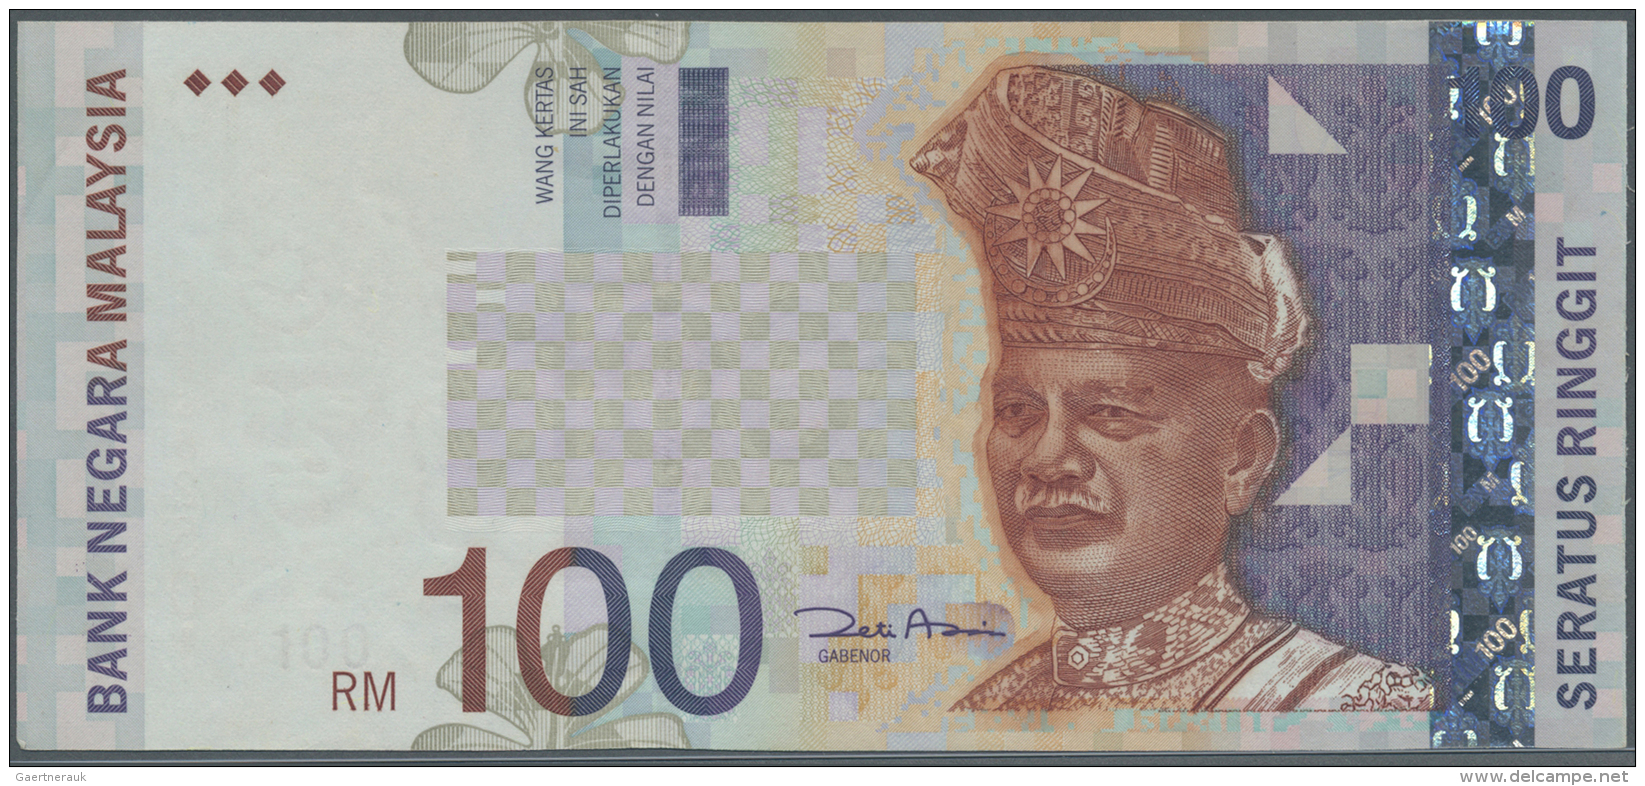 Malaysia: 100 Ringgit ND(1996-2001) P. 44 With Error Print Of The Portrait Color, Light Folds In Paper, Condition: XF. - Malaysie